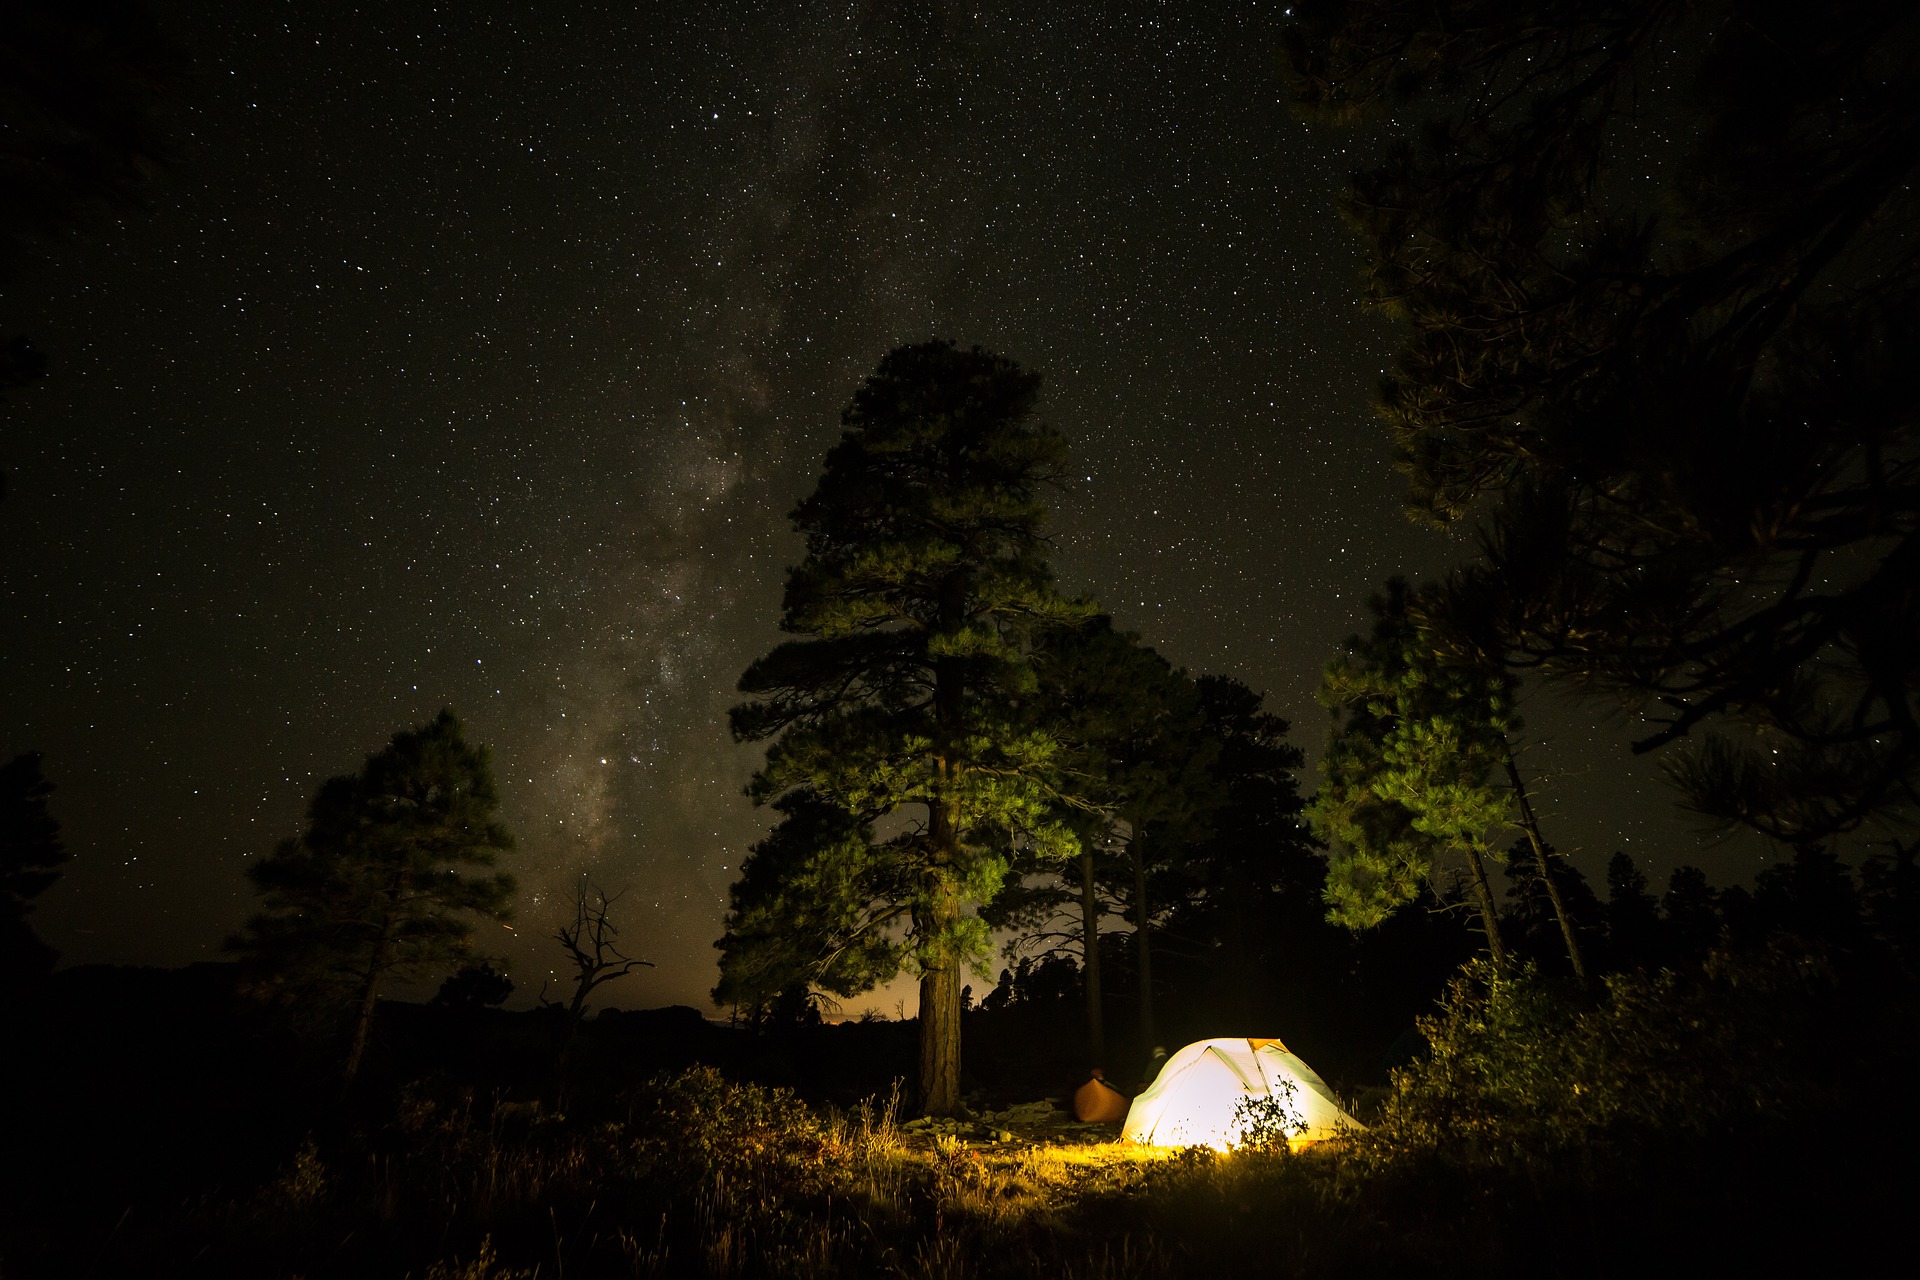 Enjoy a romantic date night out camping with your love under the stars